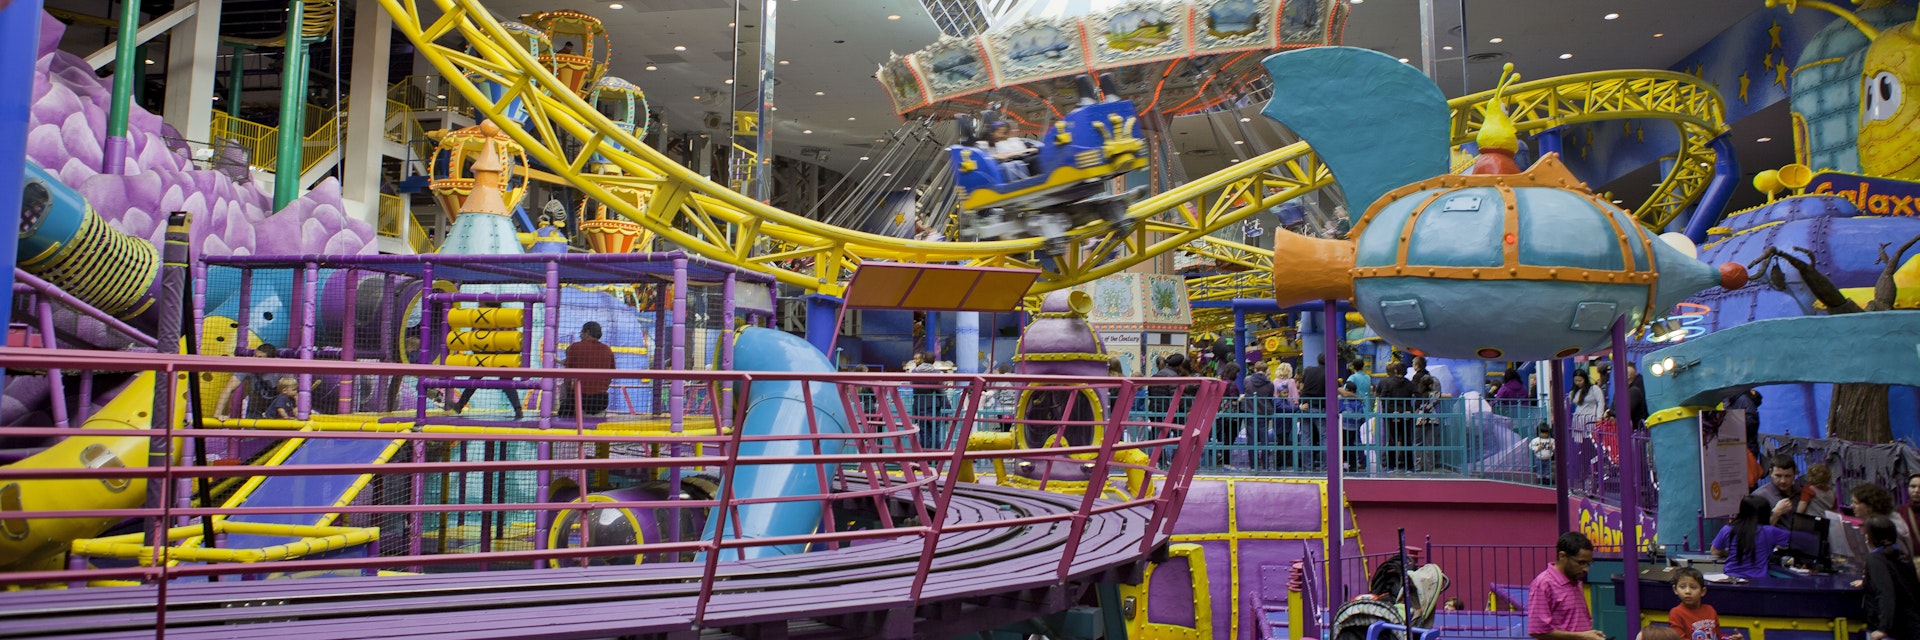 West Edmonton Mall, Galaxyland

Wikimedia Commons: https://commons.wikimedia.org/wiki/File:West_Edmonton_Mall,_Edmonton,_Alberta_(21485641783).jpg

CC License: https://creativecommons.org/licenses/by/2.0/